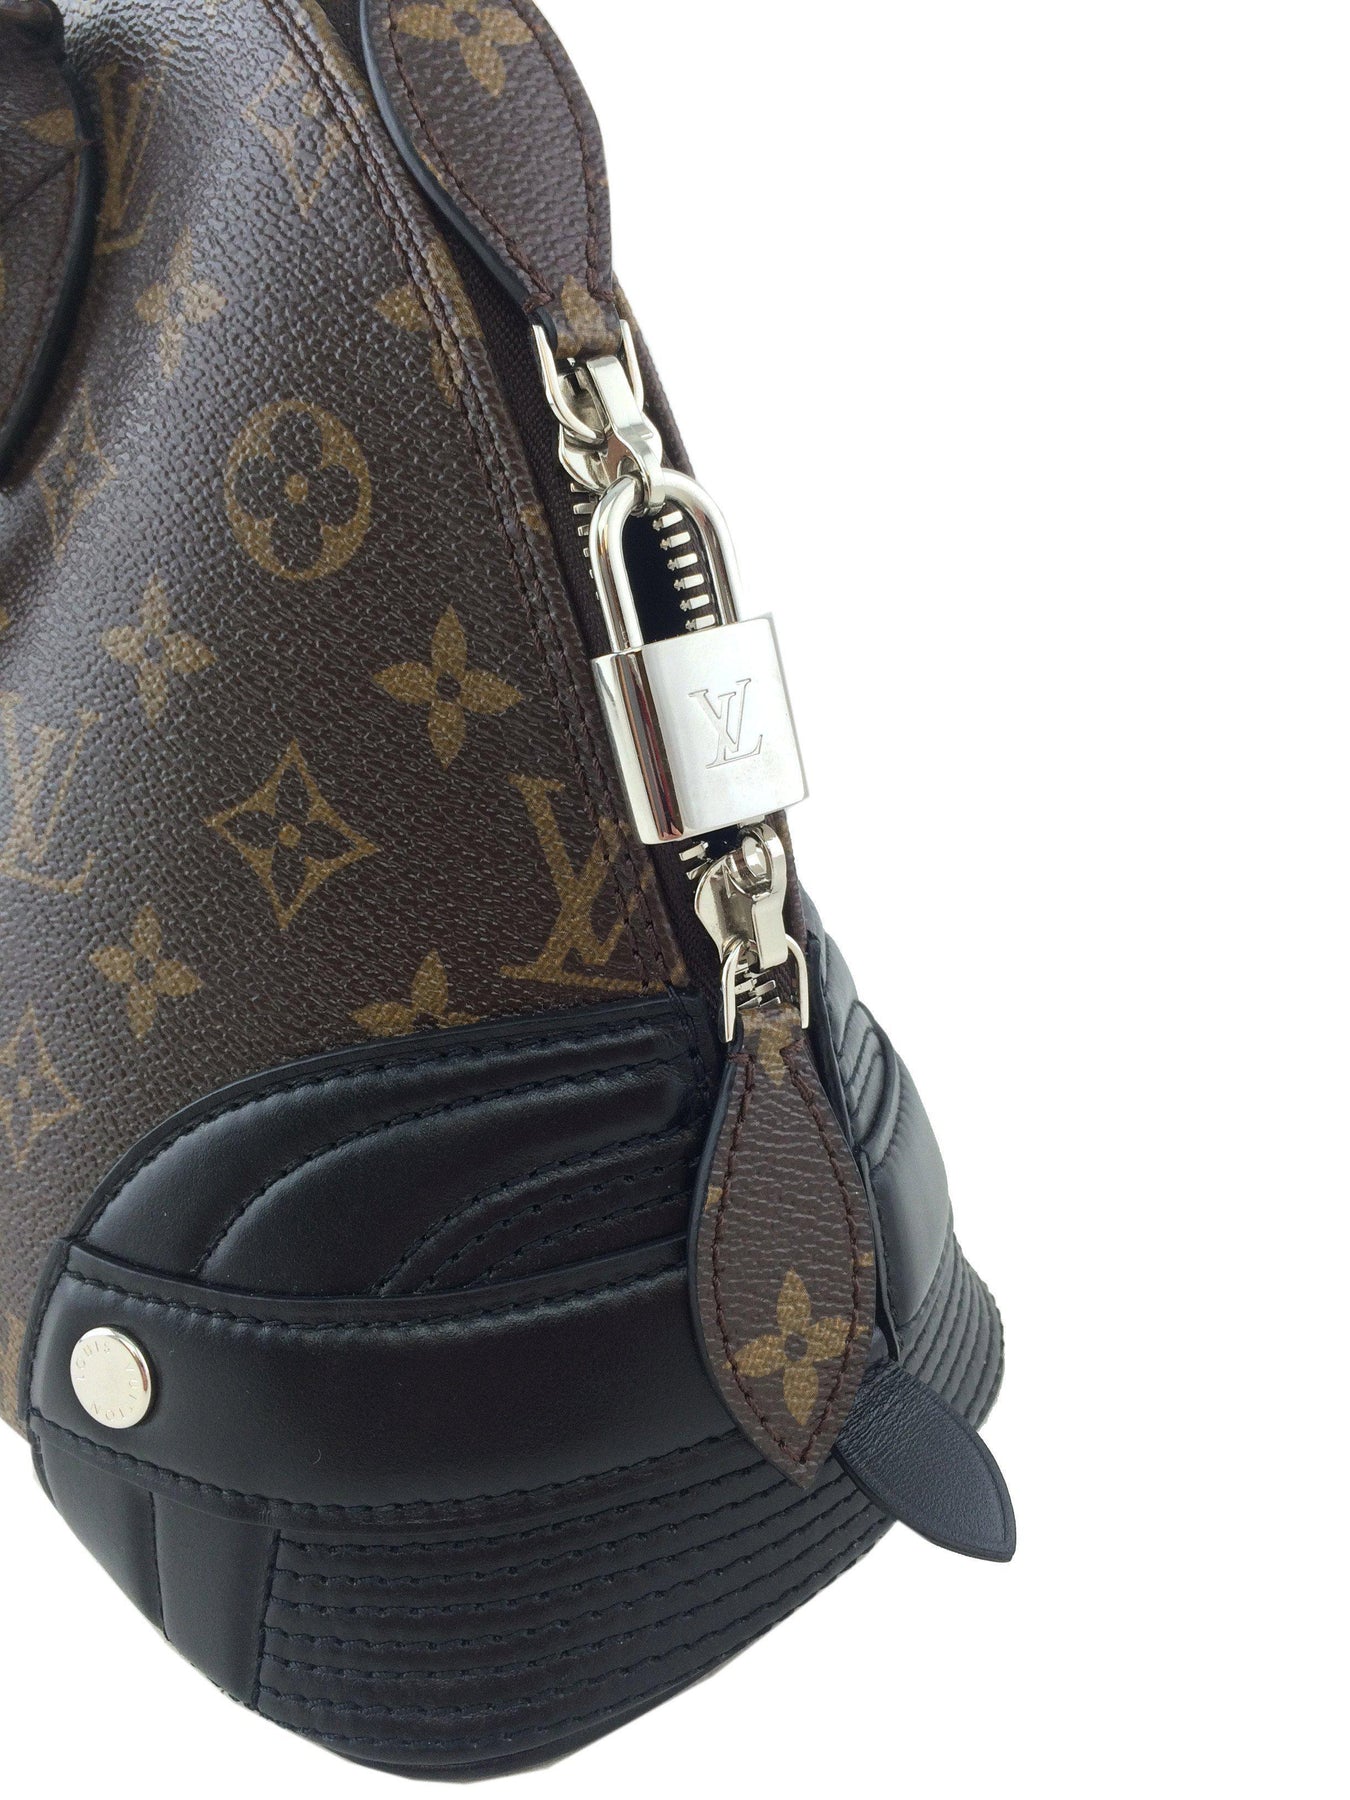 Shine Bright with Louis Vuitton's Alma PM Luxury Monogrammed